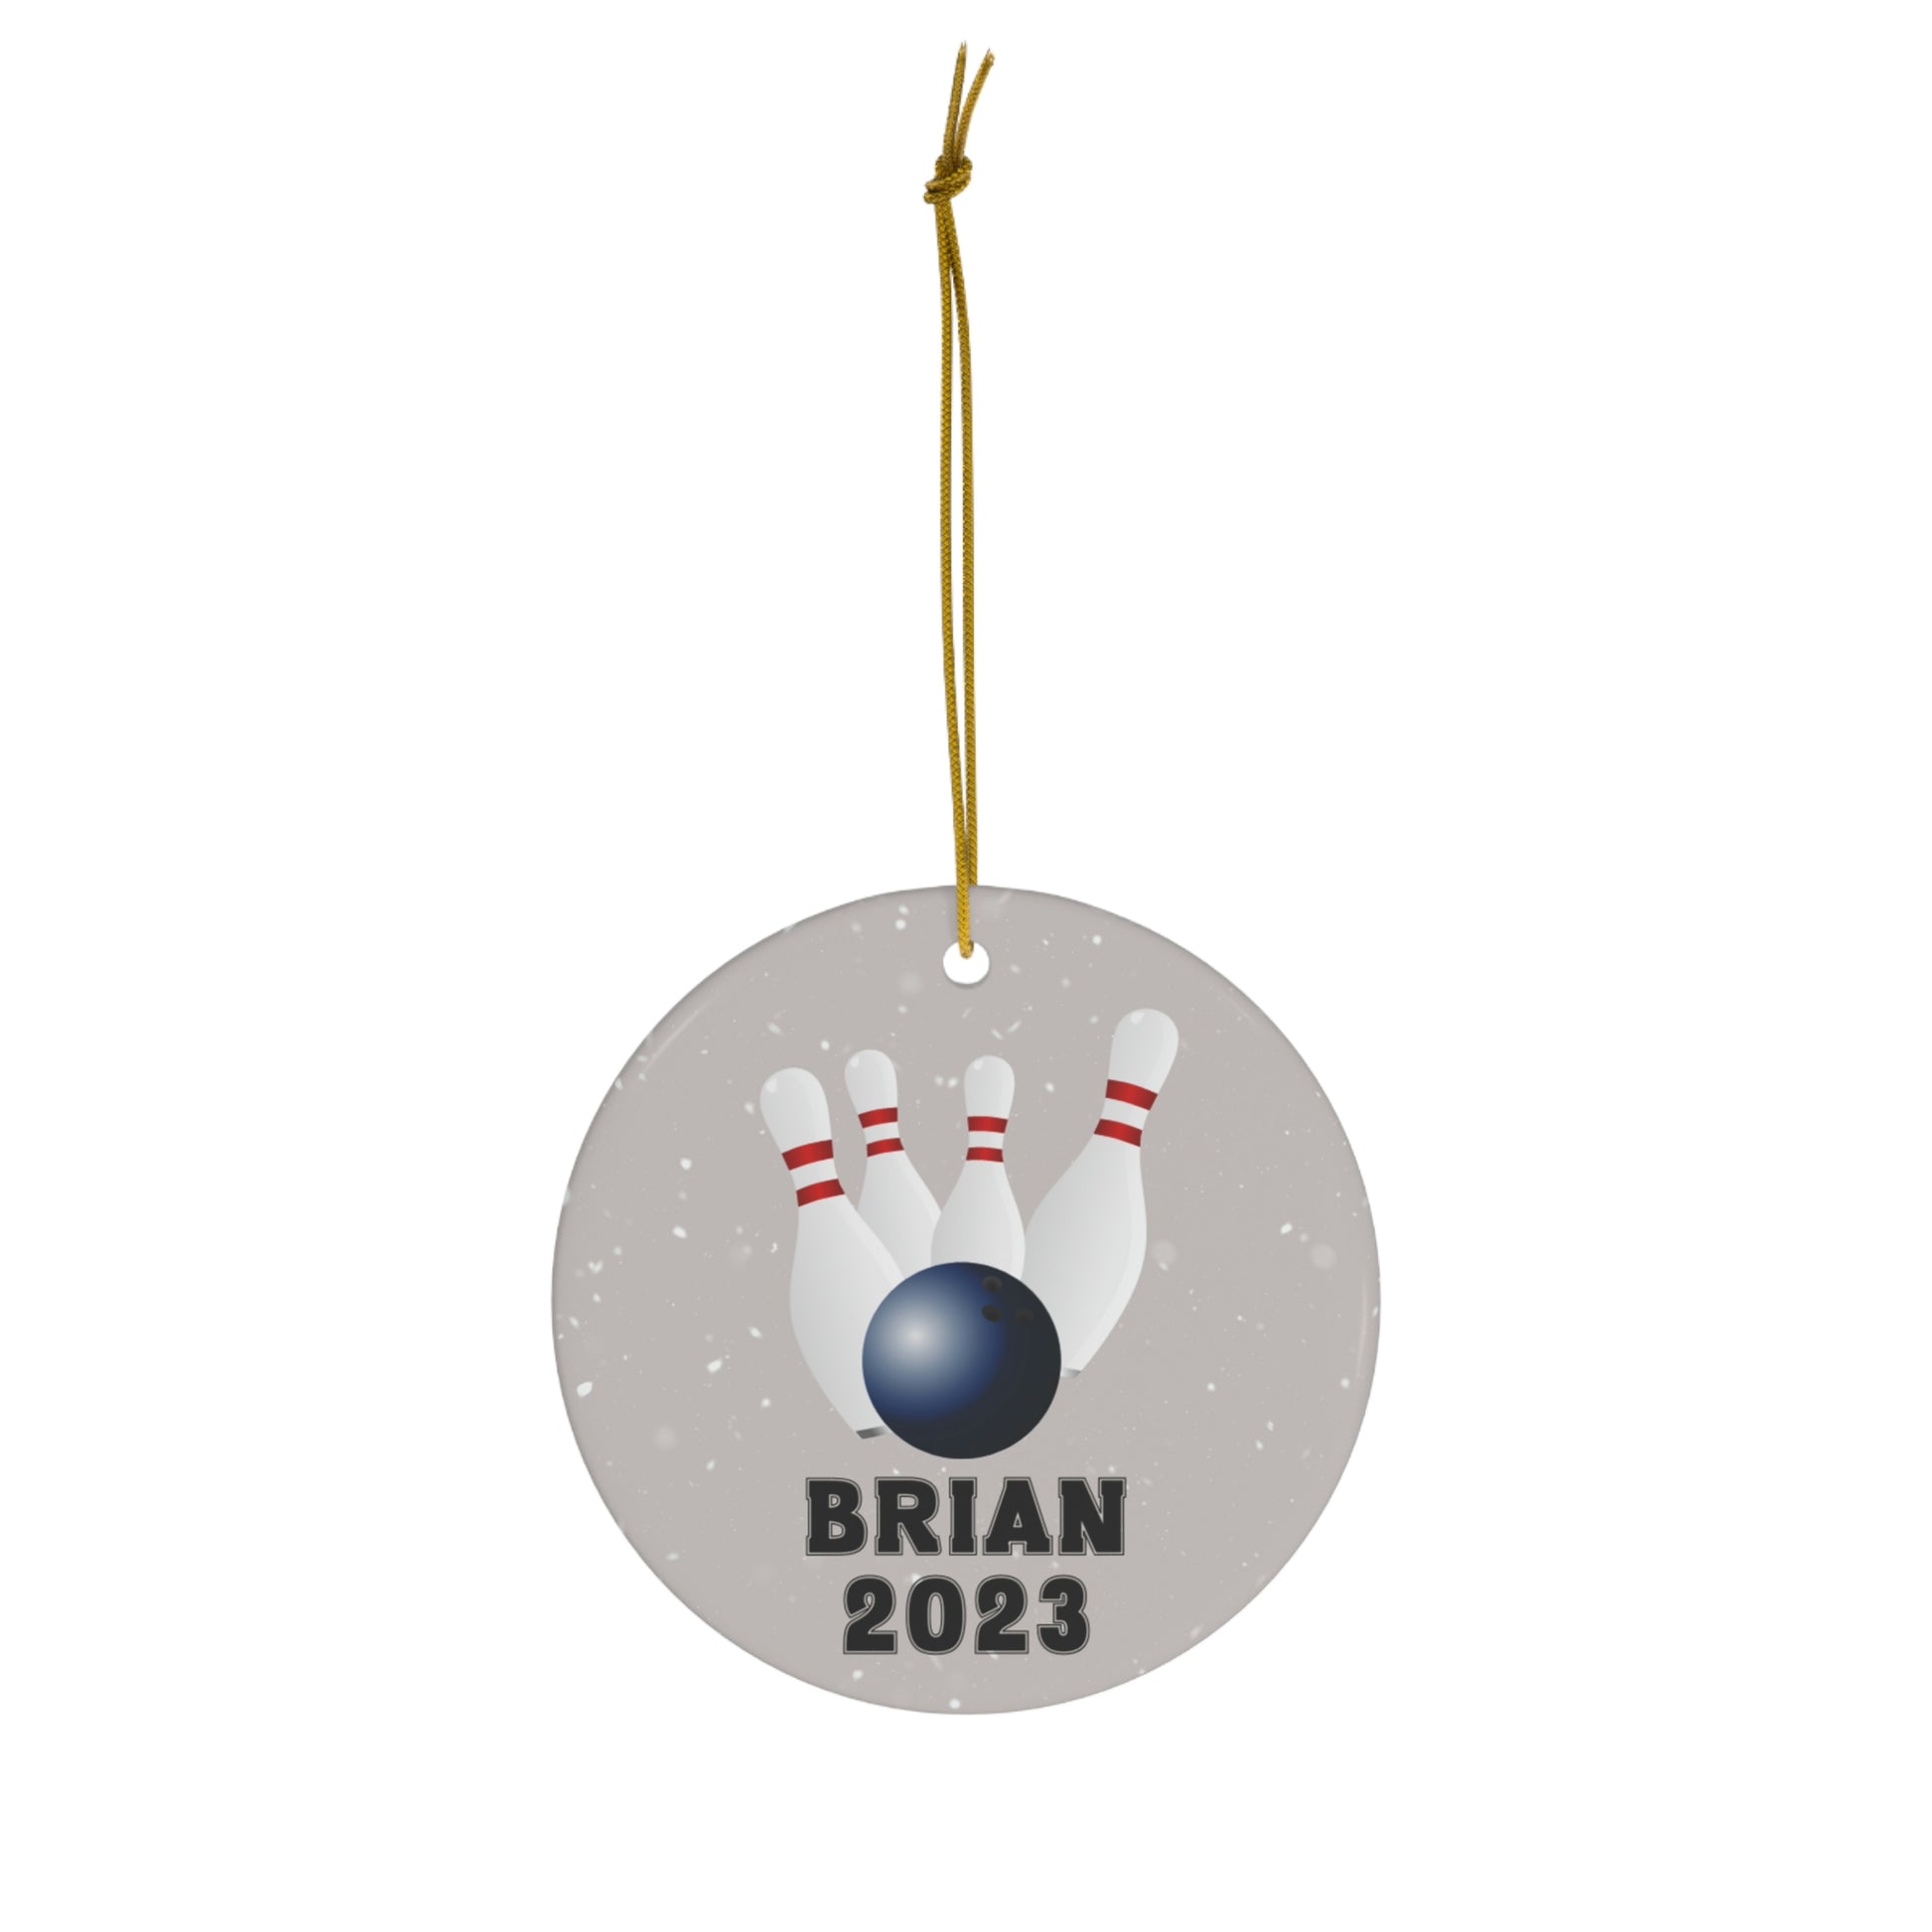 Bowling personalized ornament